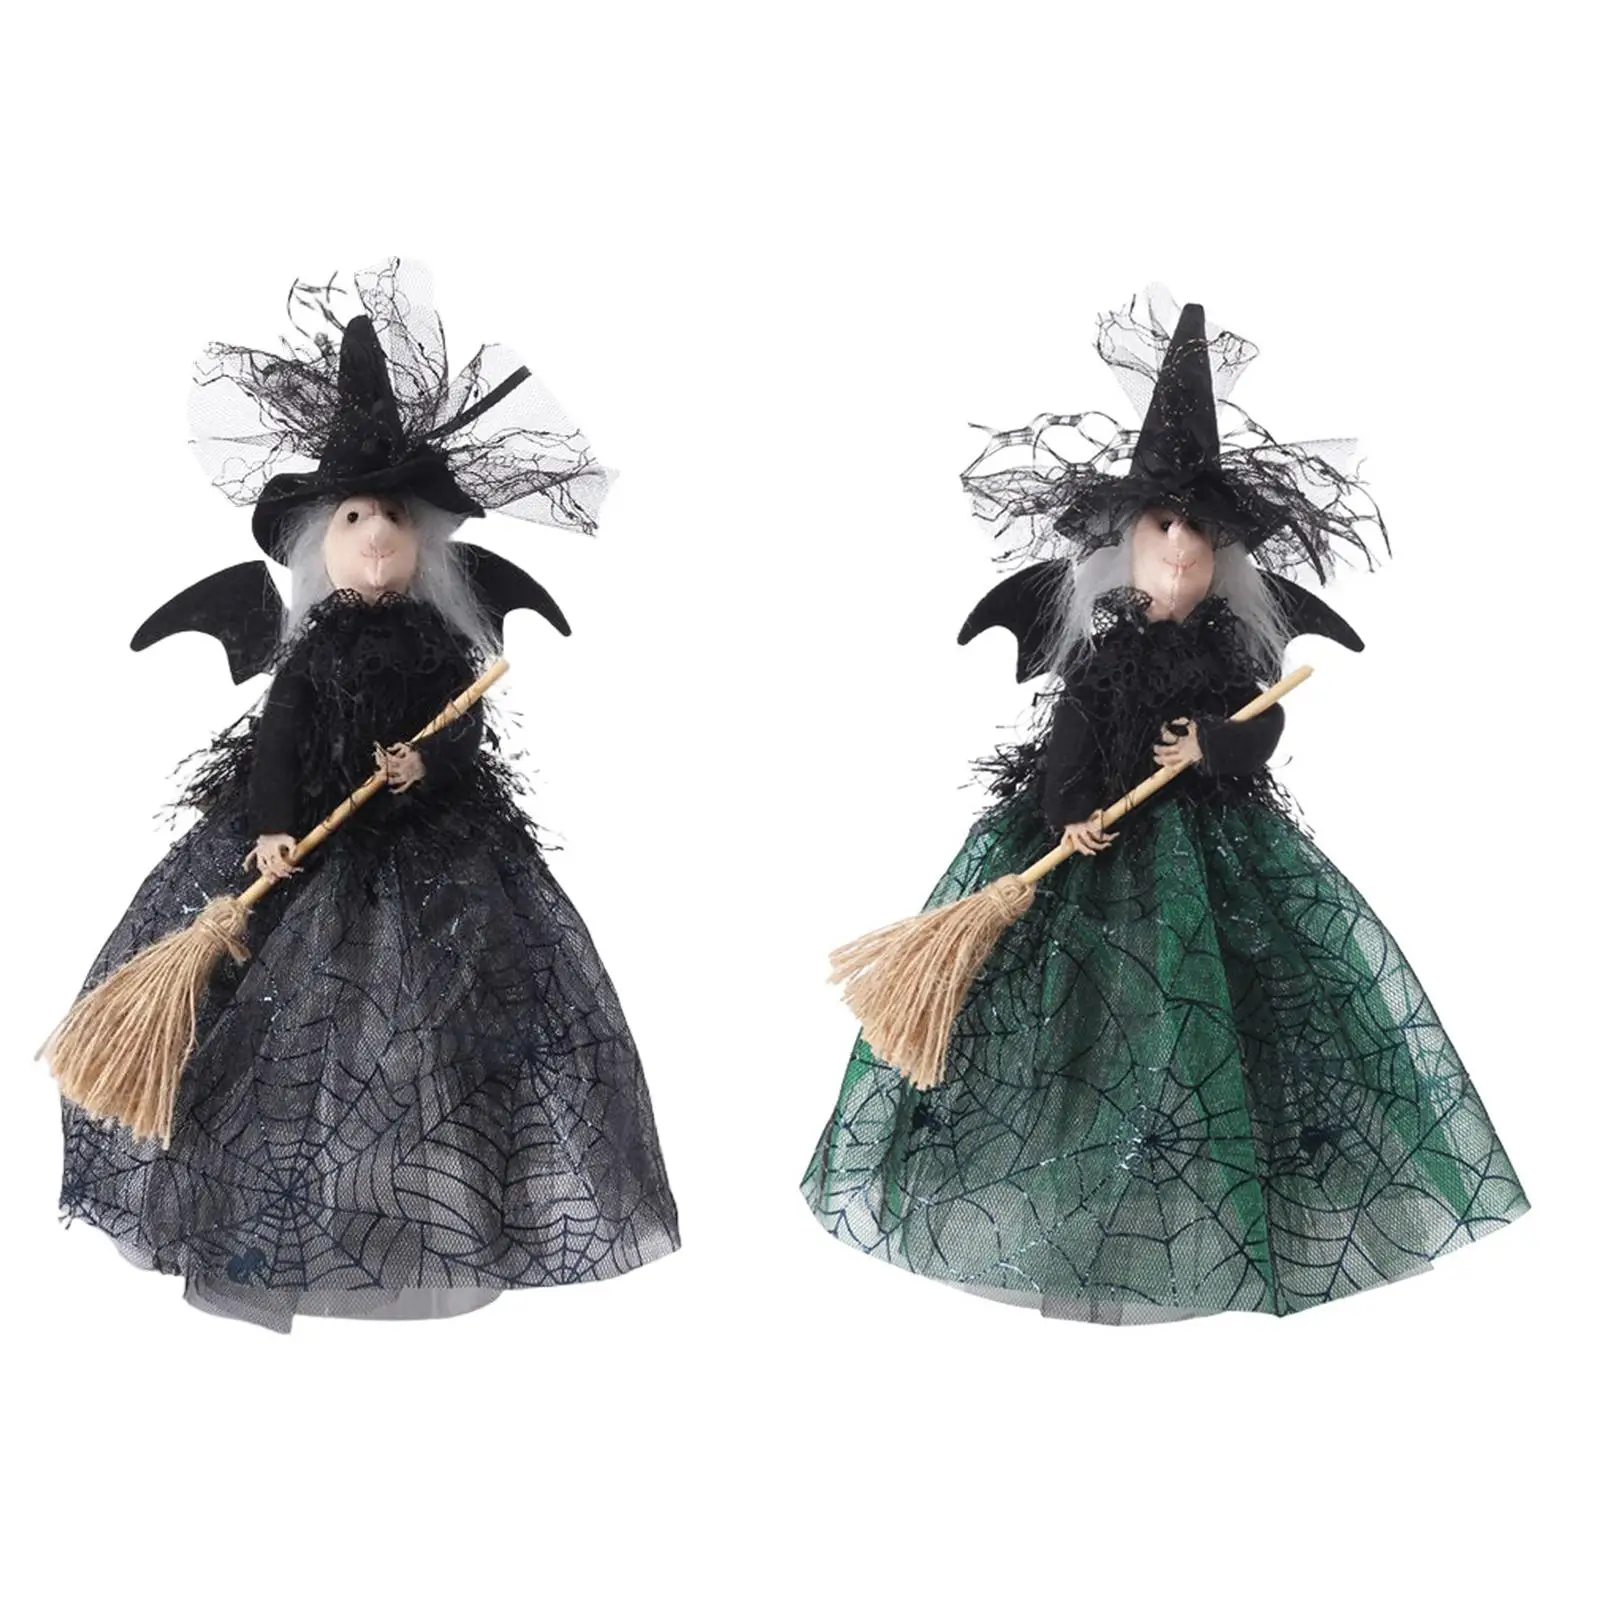 Cute Witch Collectible Dolls Photo Props Witch Figurines for Halloween Party Office